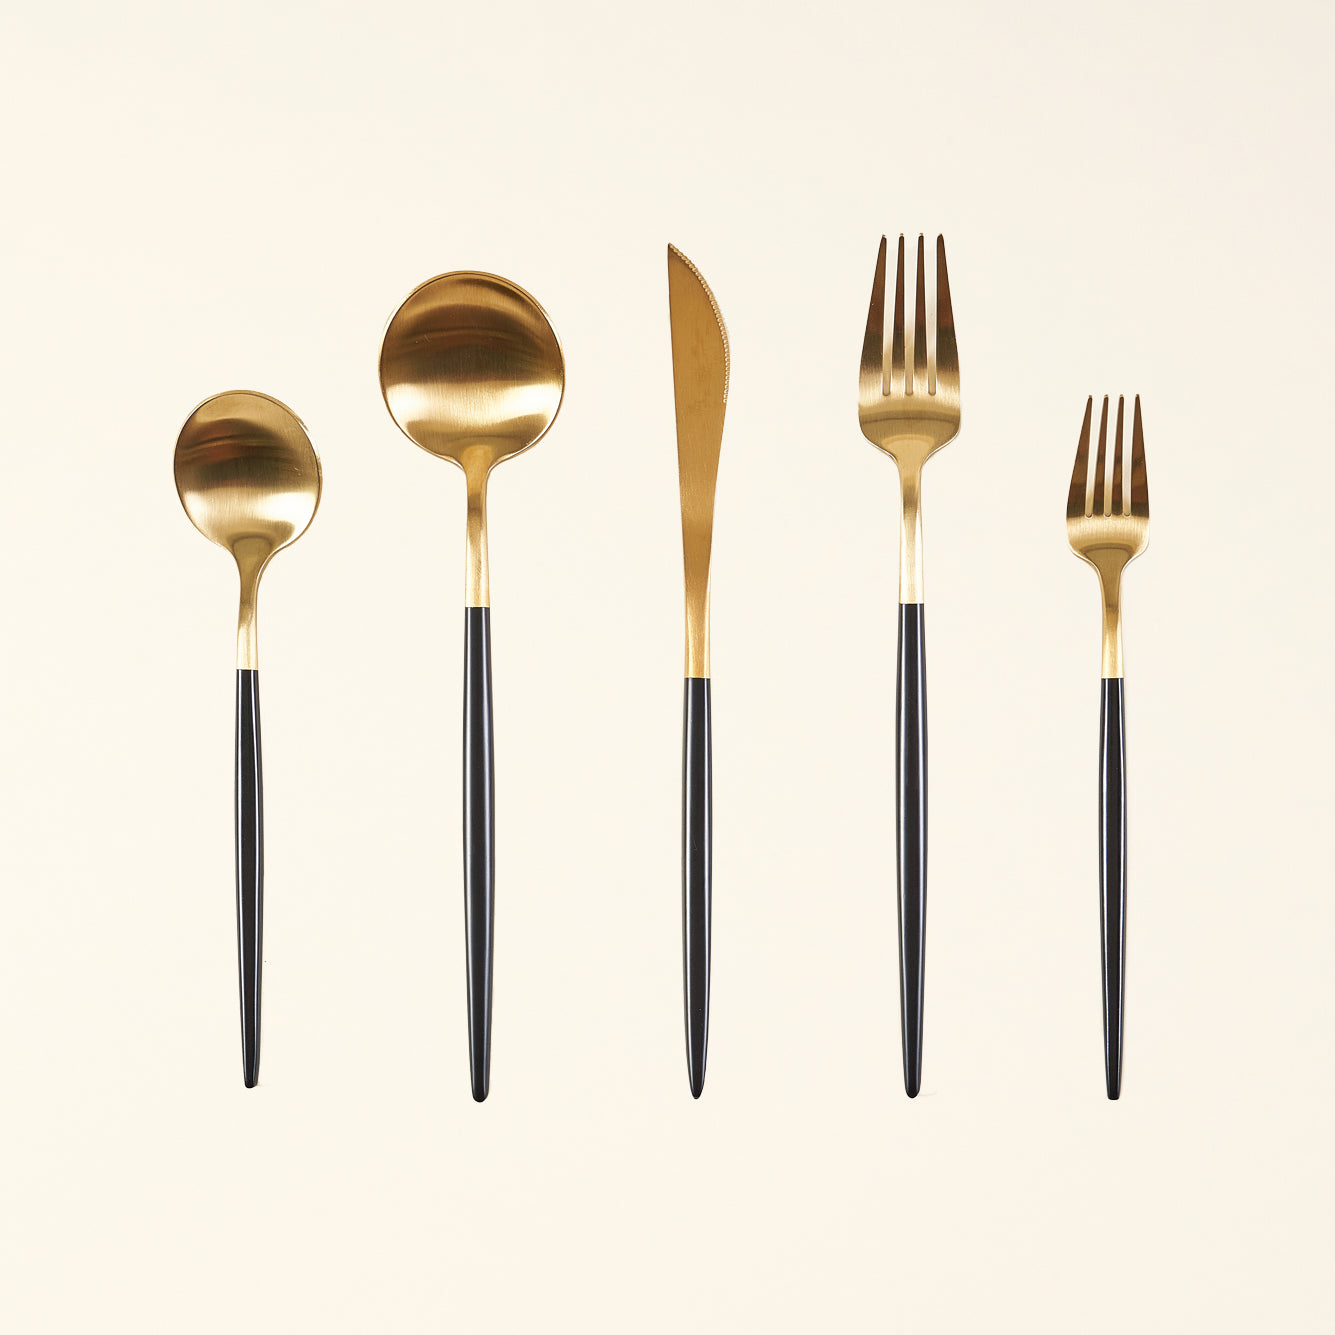 Black & Gold Flatware 5pc Placesetting